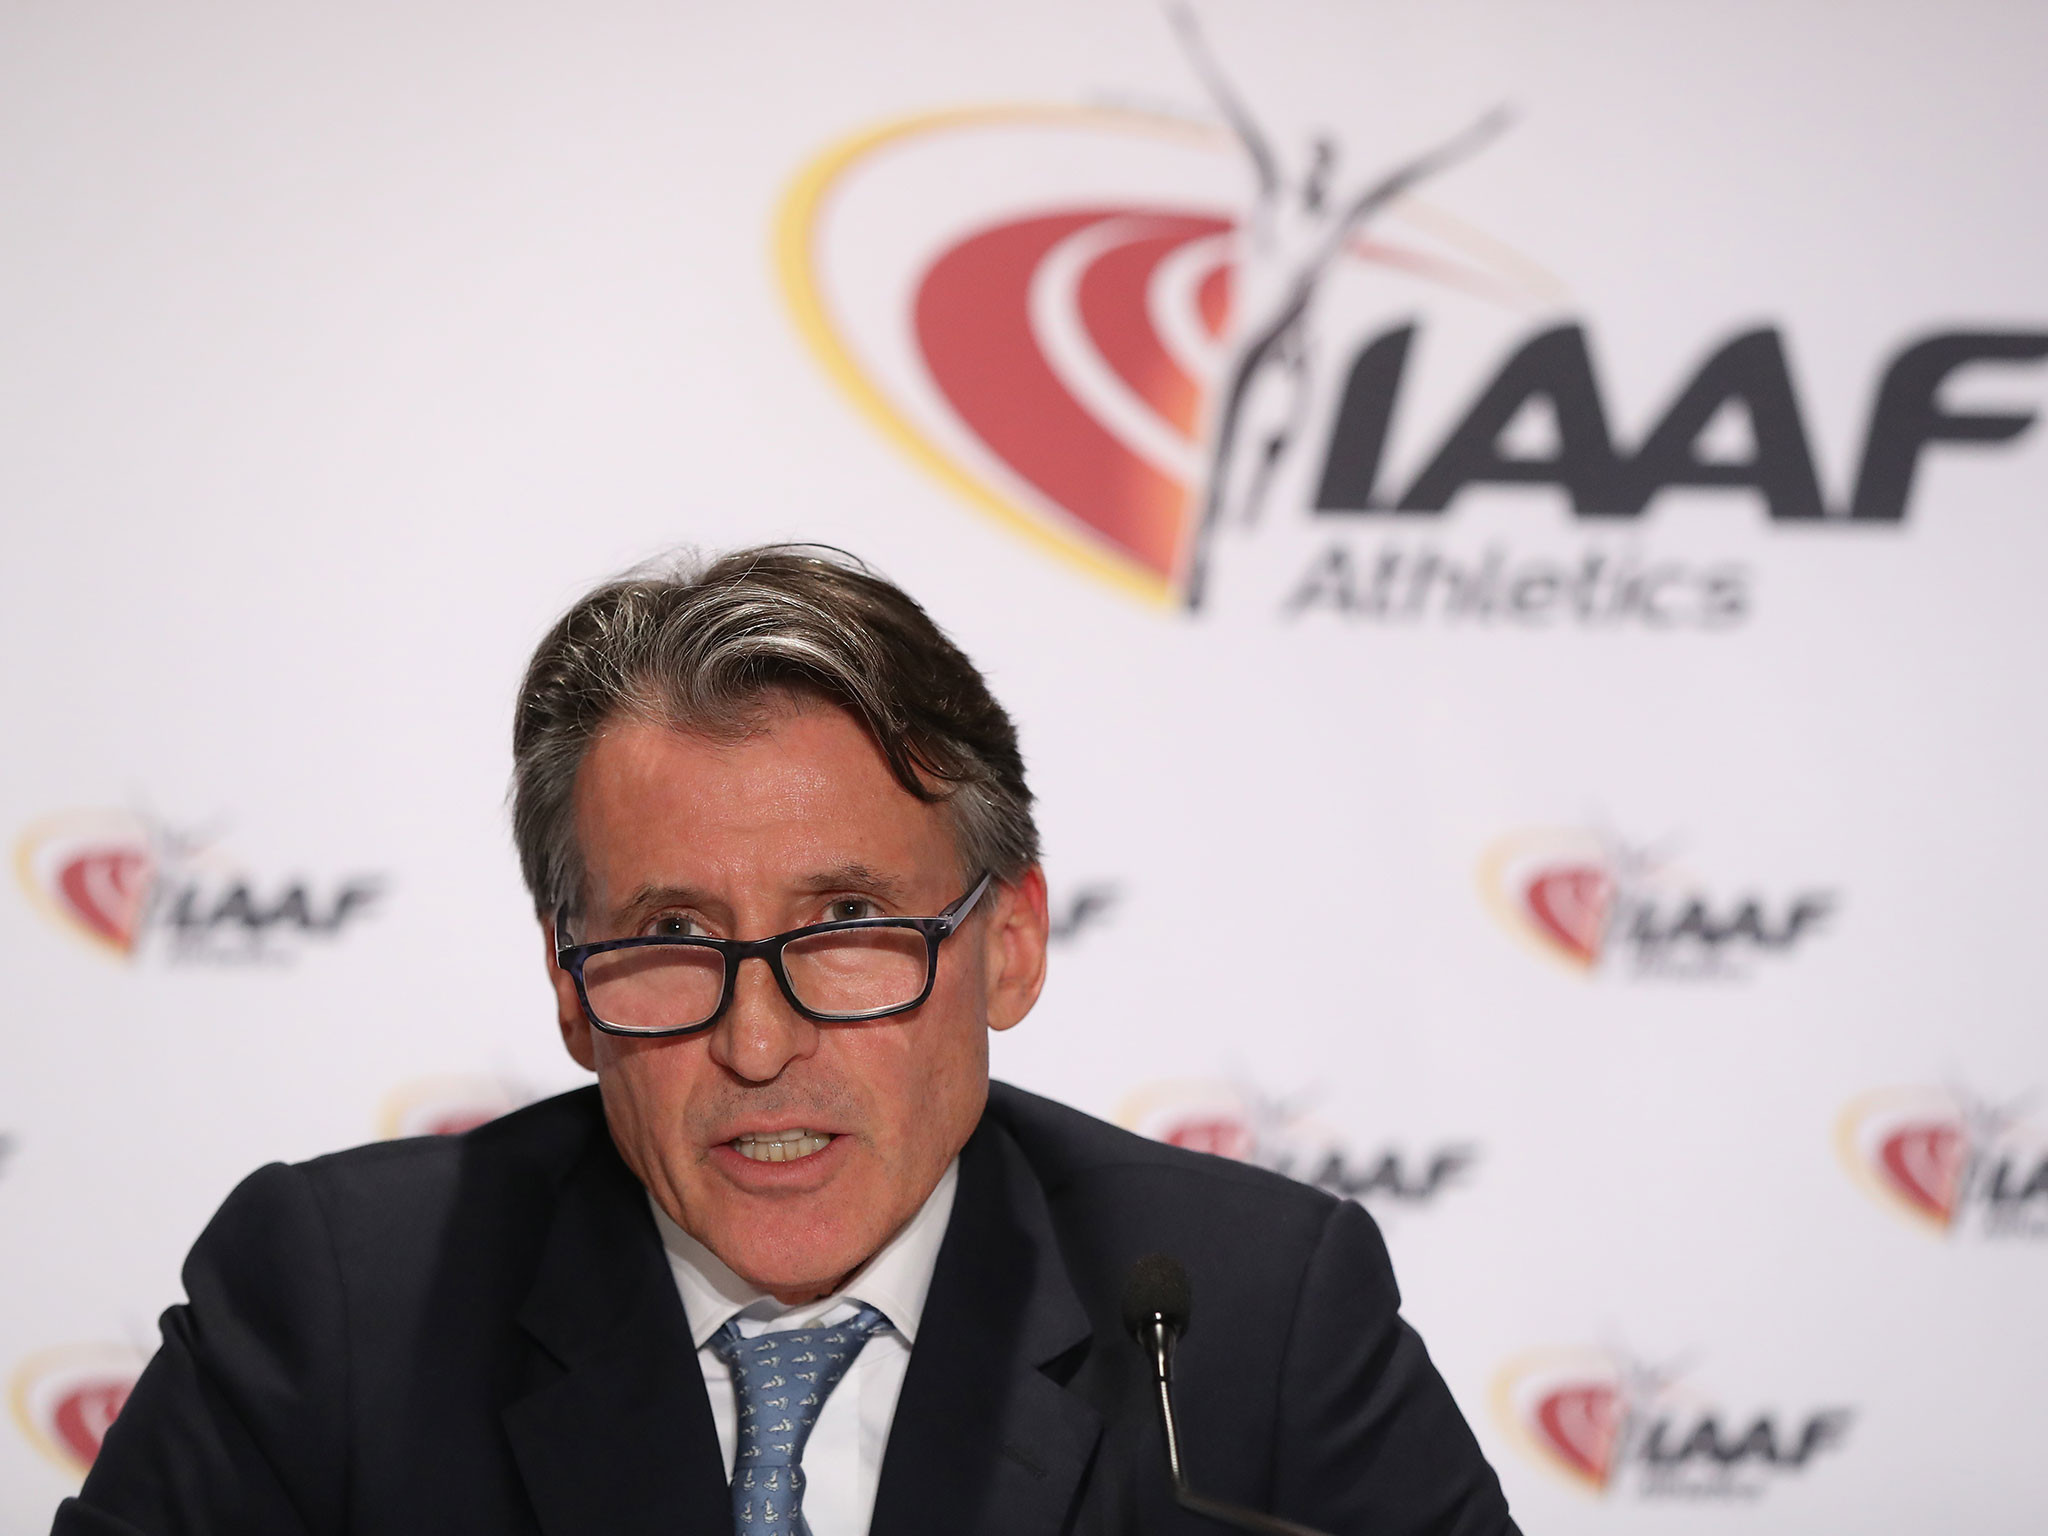 The conduct of IAAF President Sebastian Coe is criticised by the report ©Getty Images